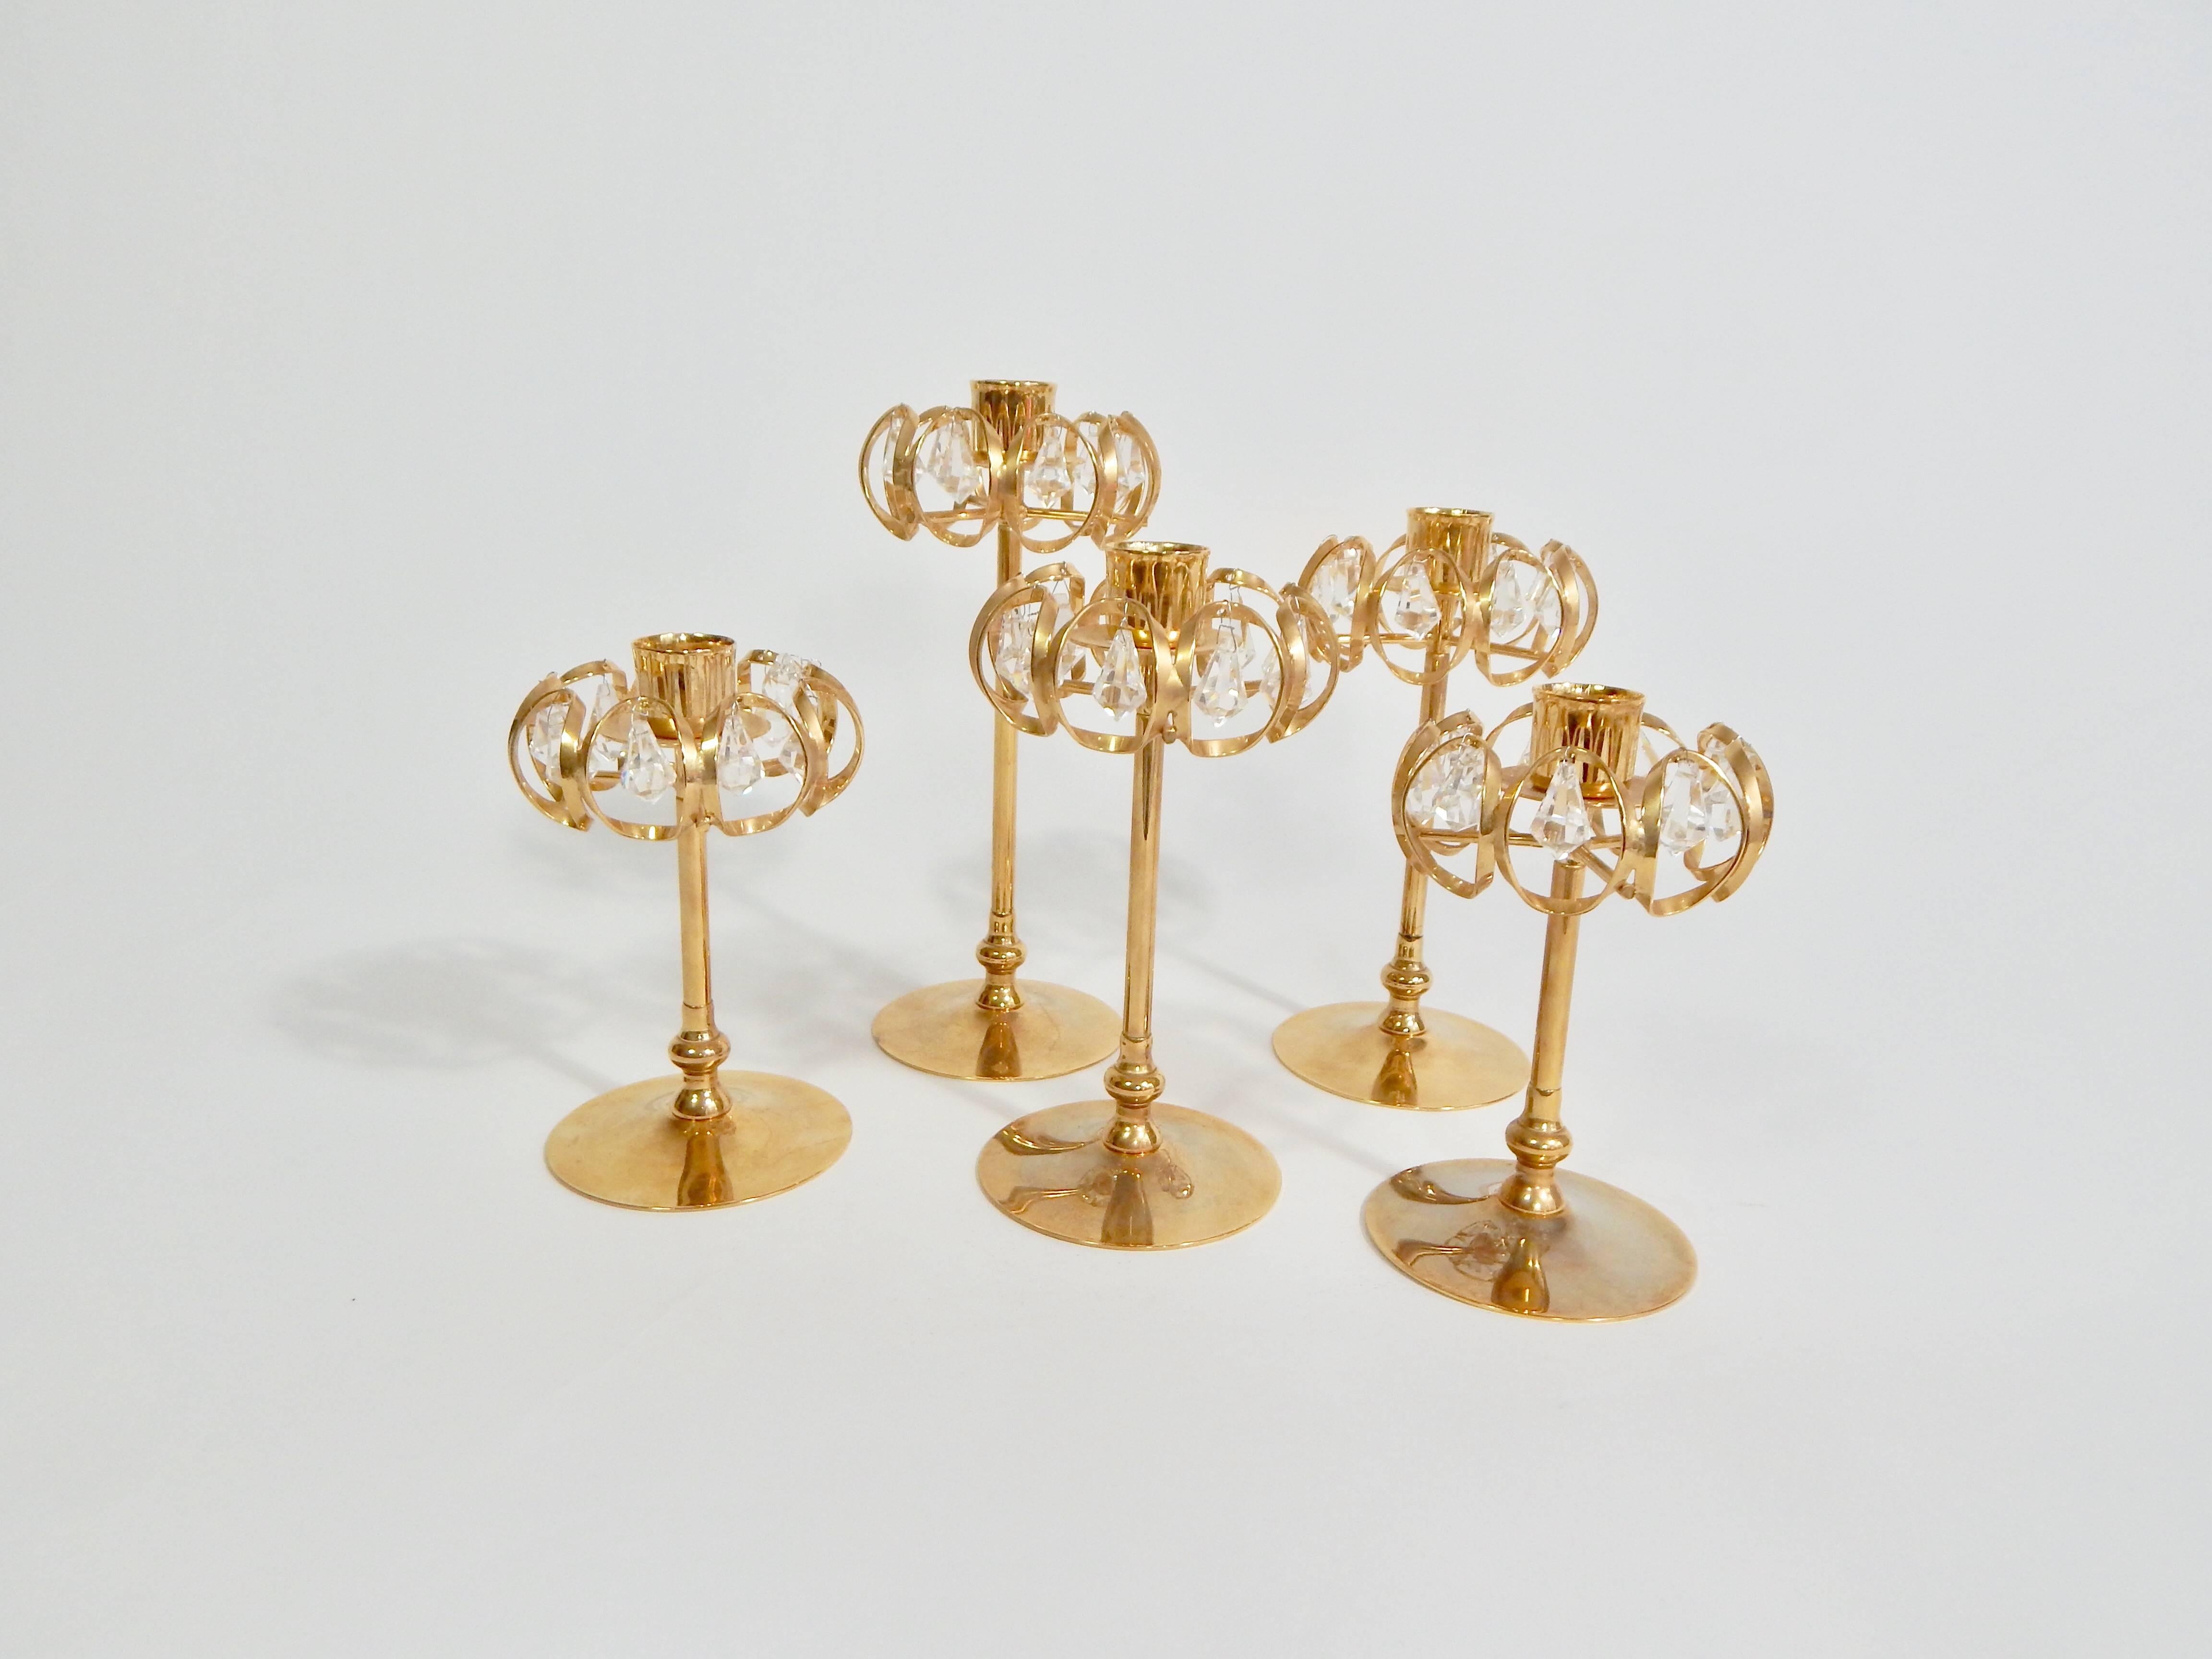 Lovely set of 24-karat gold-plated and crystal candlesticks. Made in Sweden. Marked Lycenta, 1984. Total set of five. Graduating sizes. Each has seven crystal teardrop prisms.
Measures: One height 7.5 inches
Two height 6.5 inches
Two height 5.25